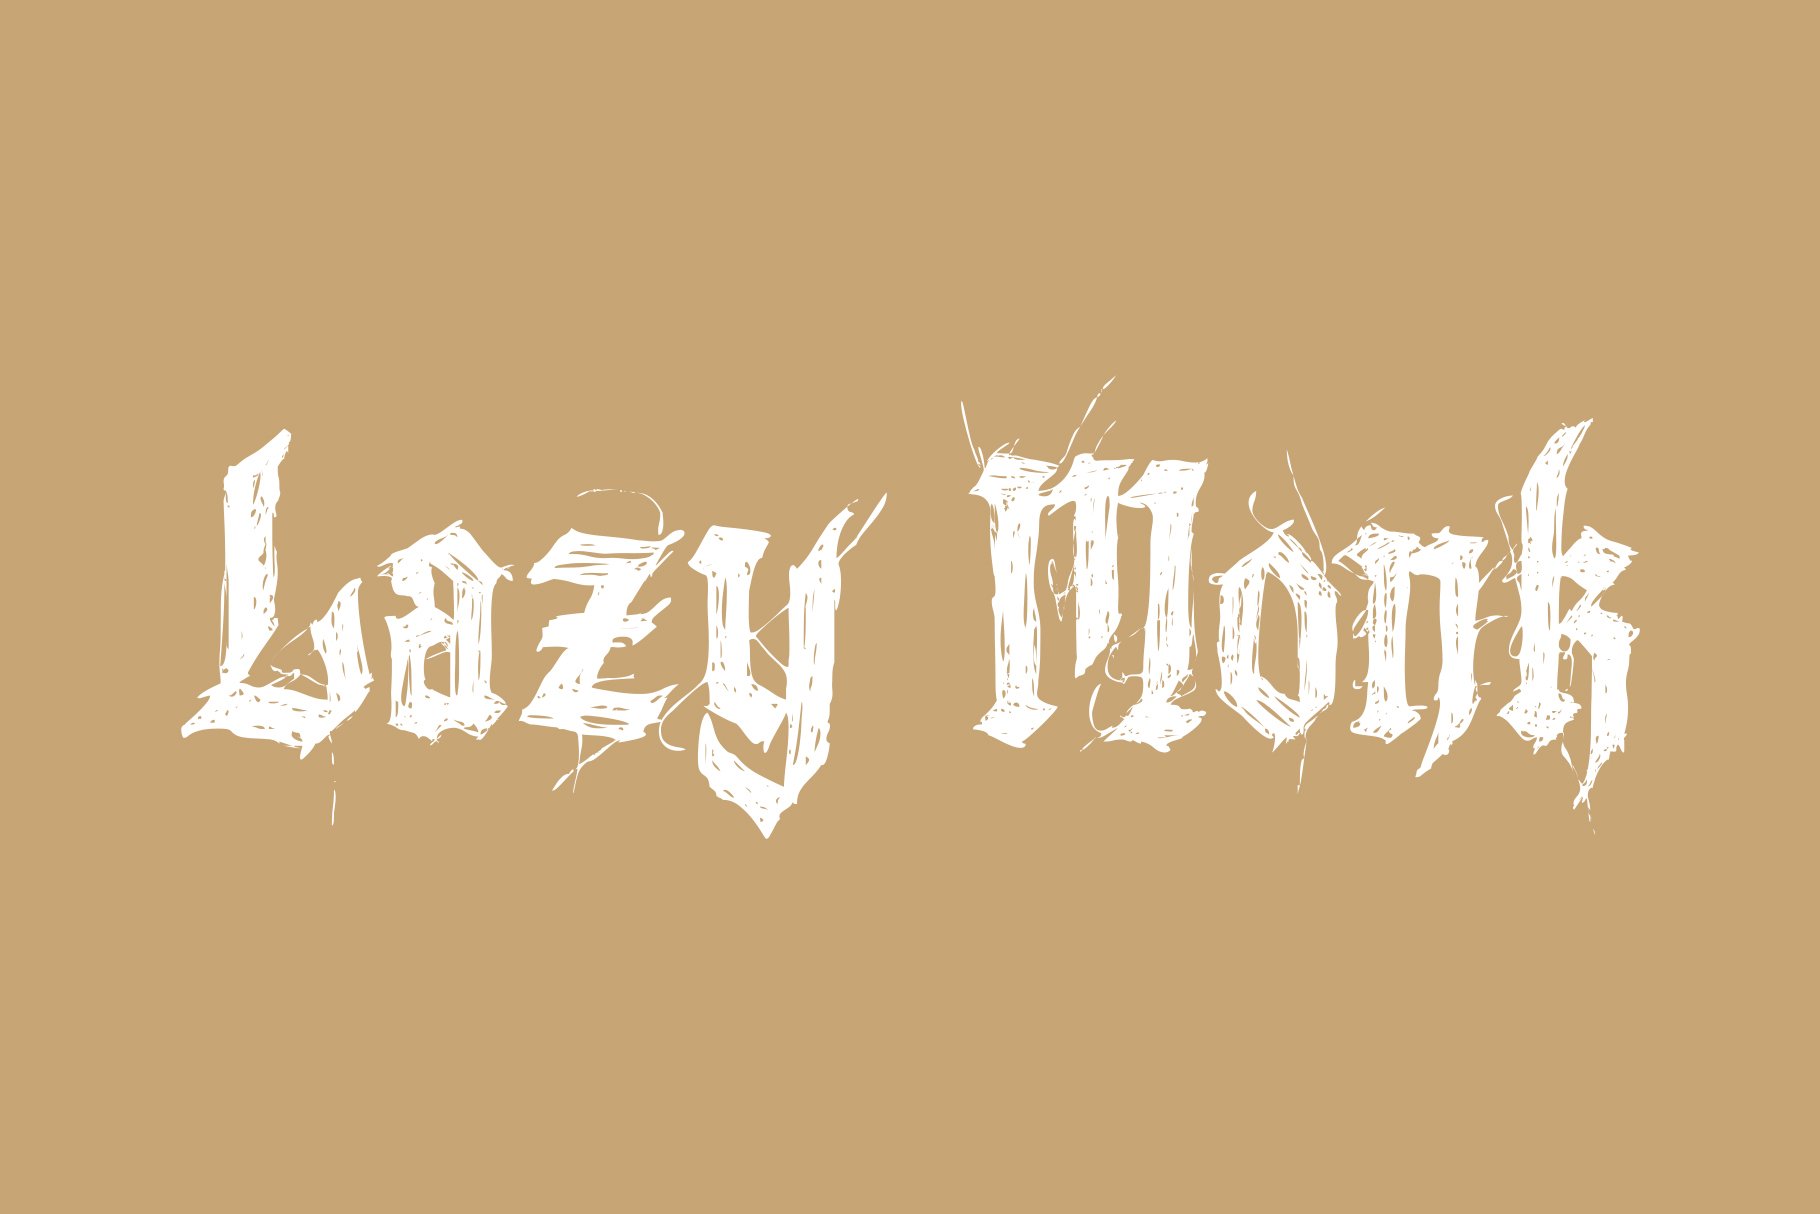 Lazy Monk cover image.